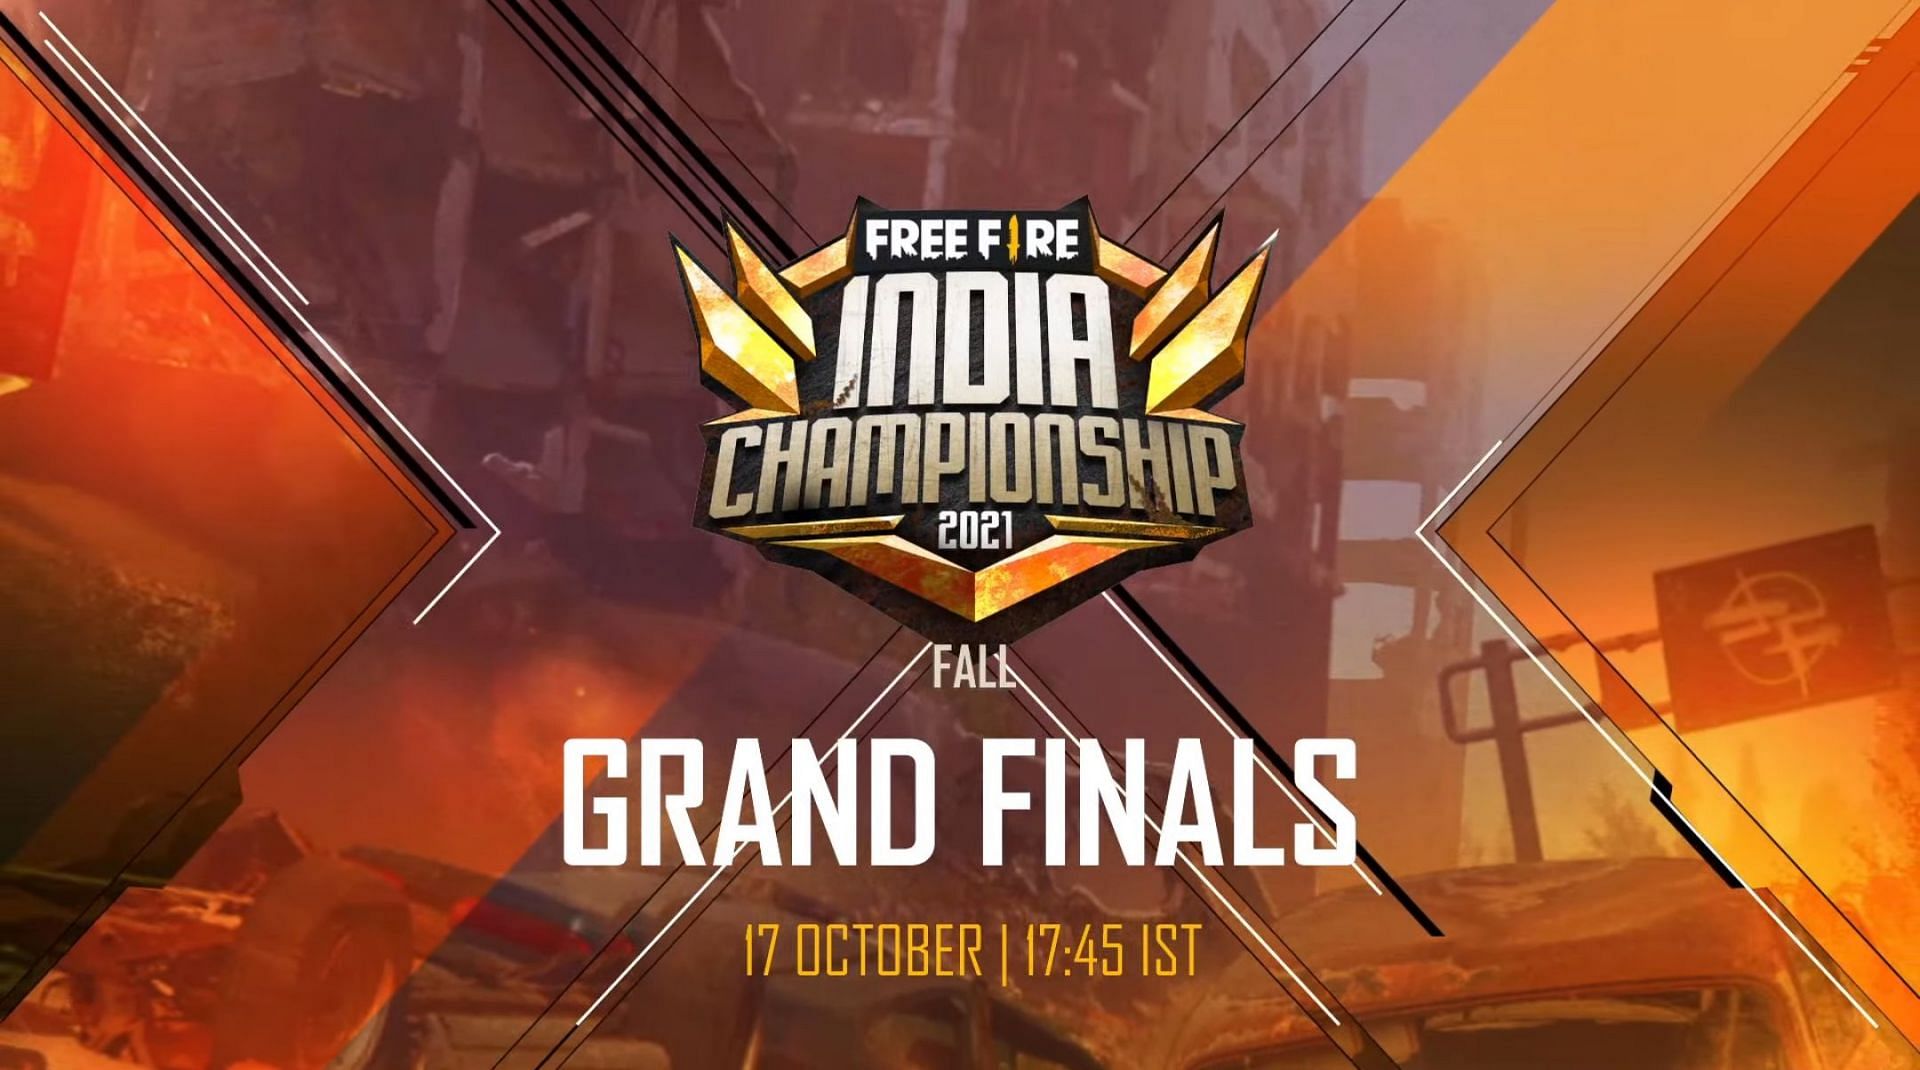 Free Fire India Championship 2021 Fall Finals concluded on October 17, 2021 (Image via Garena)